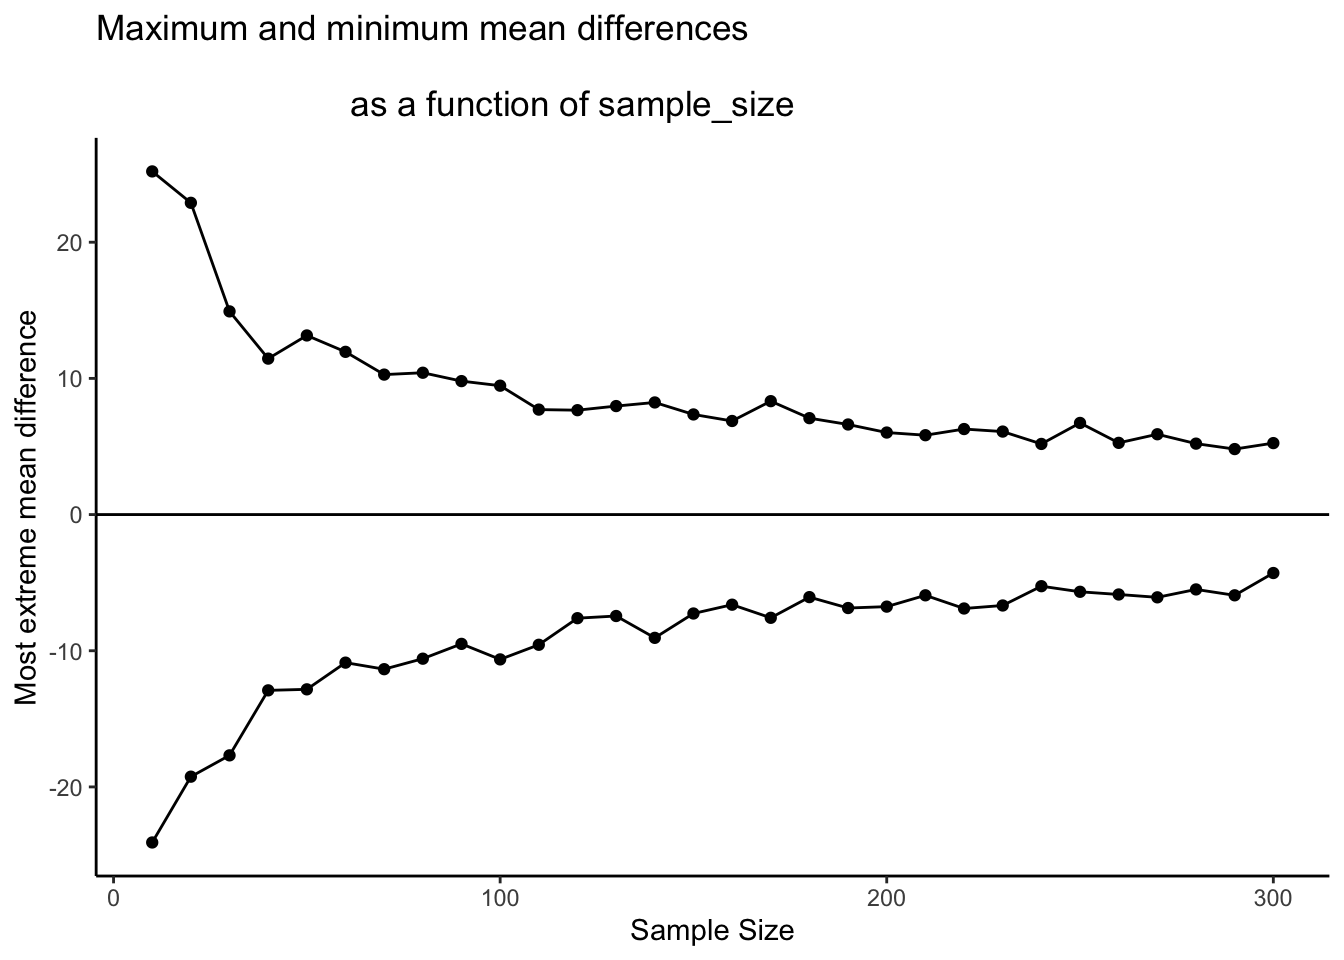 A graph of the maximum and minimum mean differences produced by chance as a function of sample-size. The range narrows as sample-size increases showing that chance alone produces a smaller range of mean differences as sample-size increases